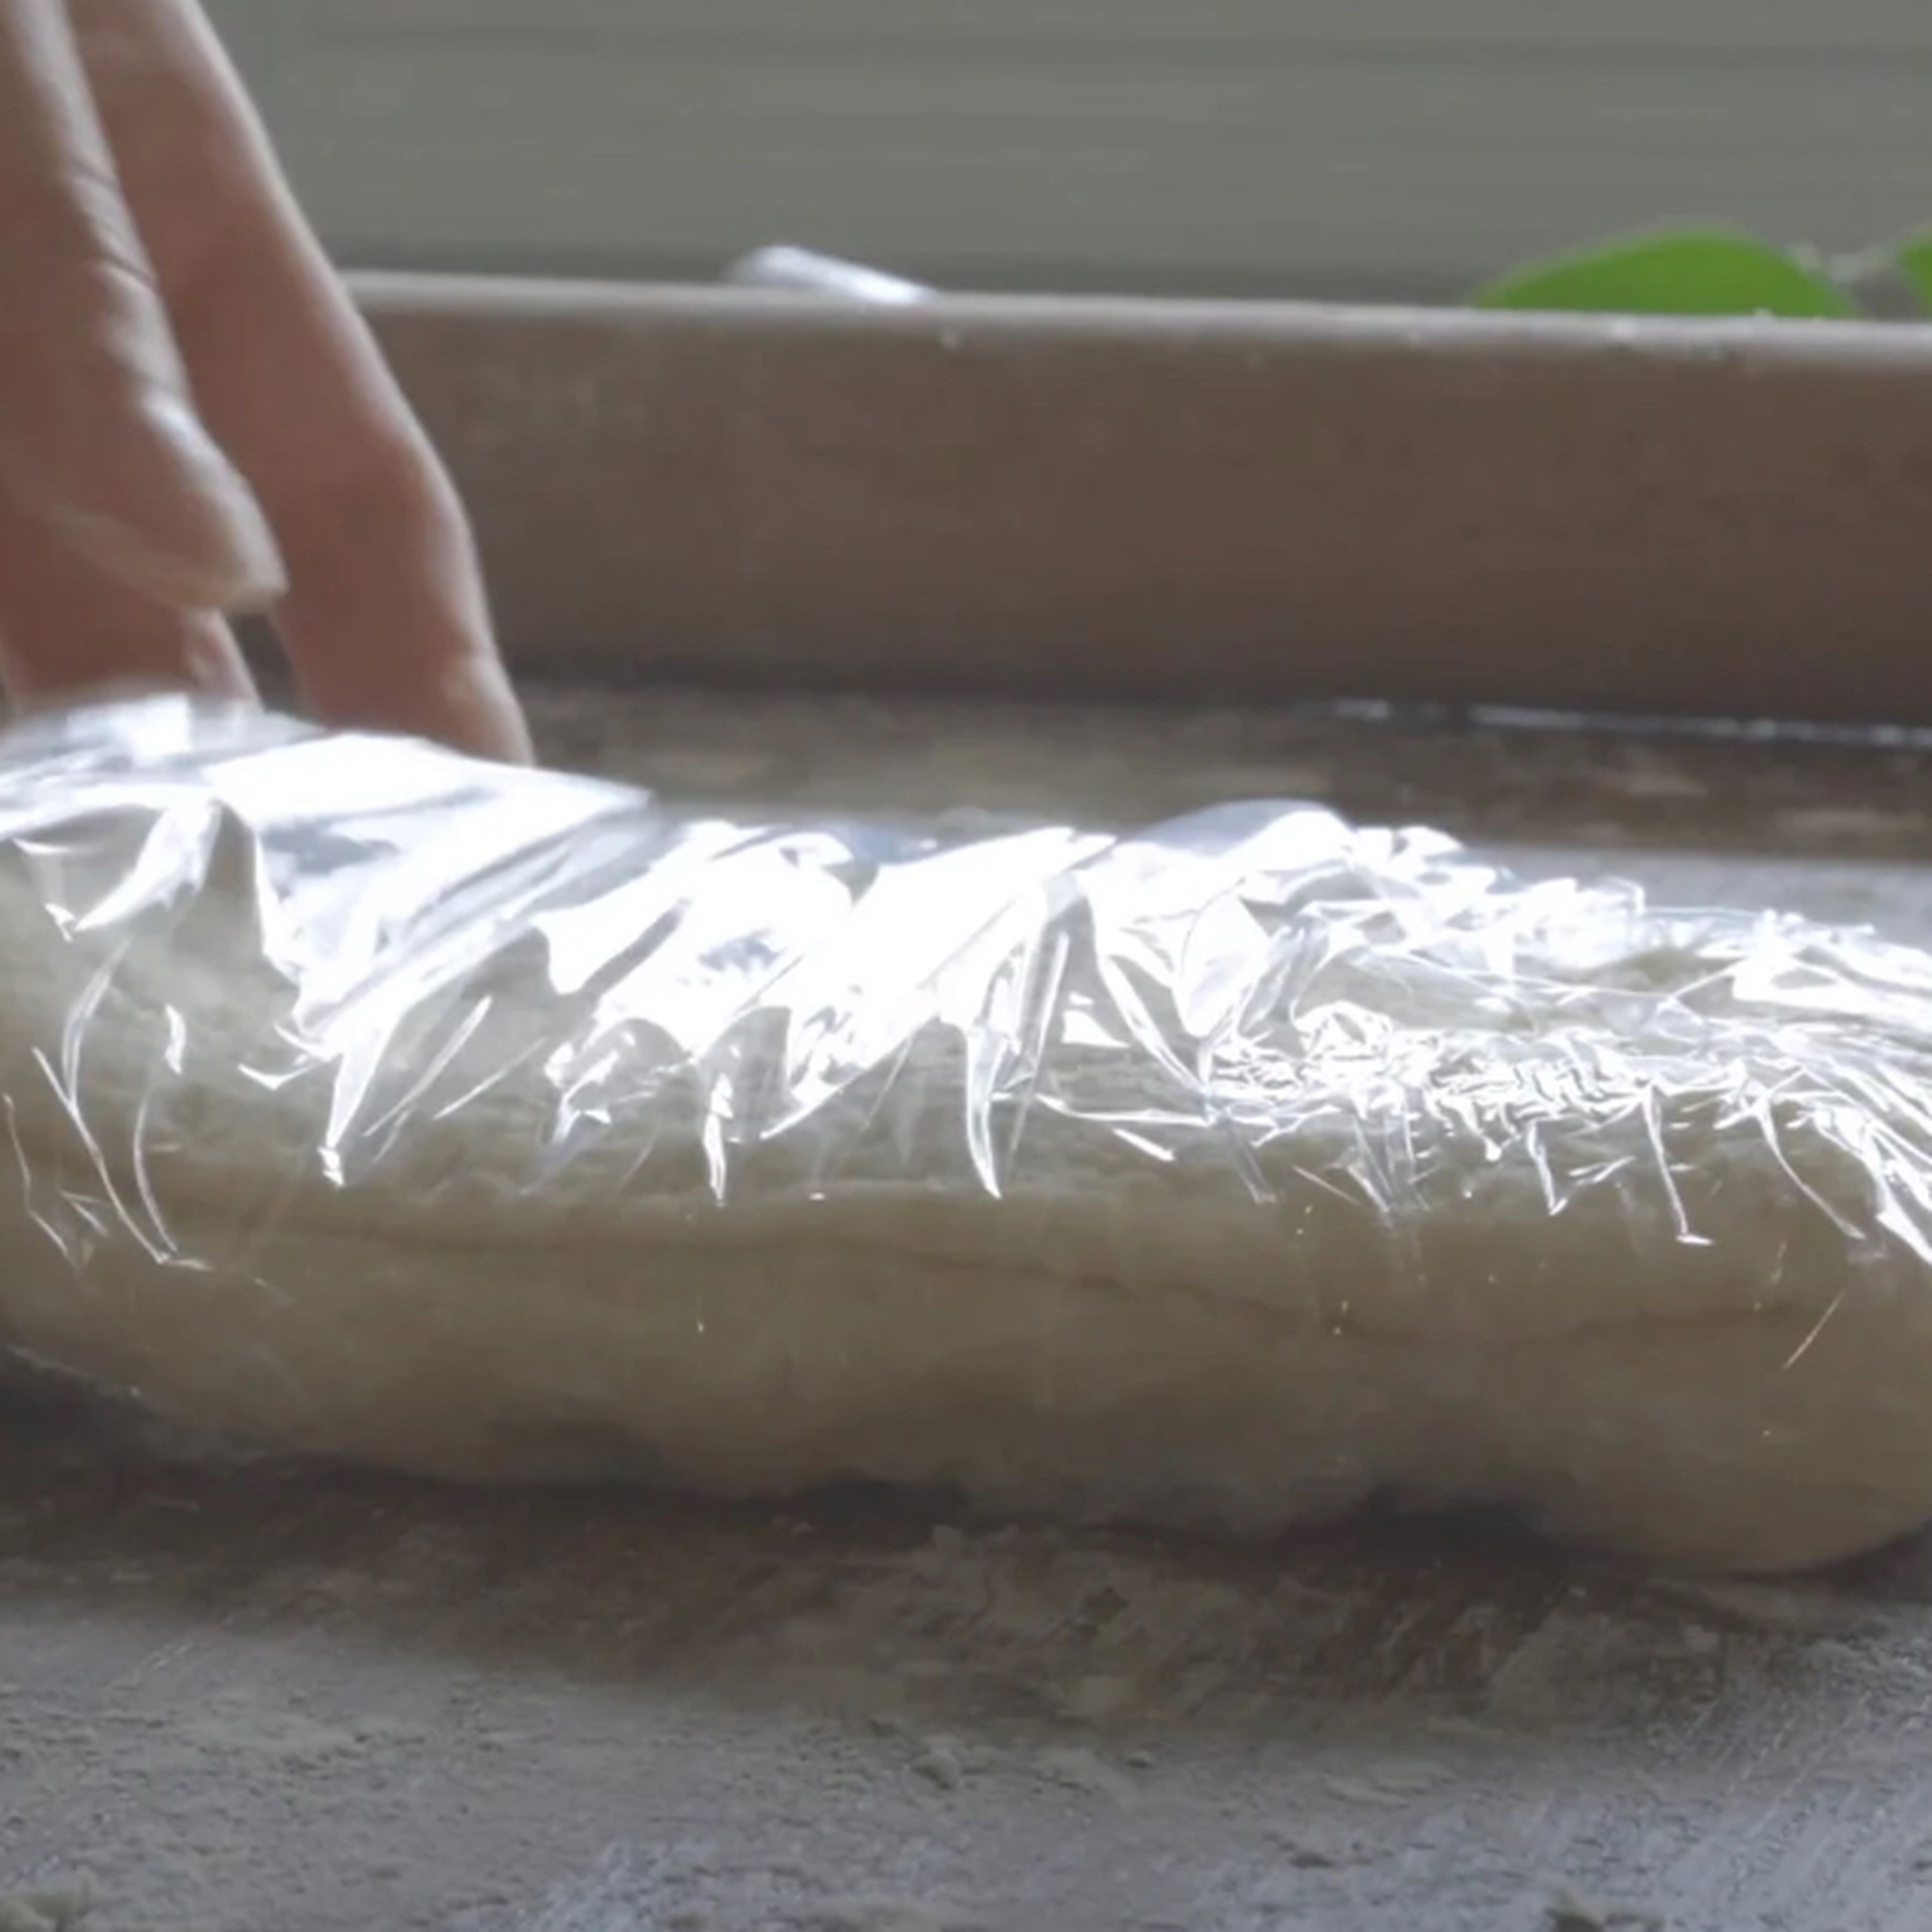 Rest the dough in the fridge for 30 minutes.